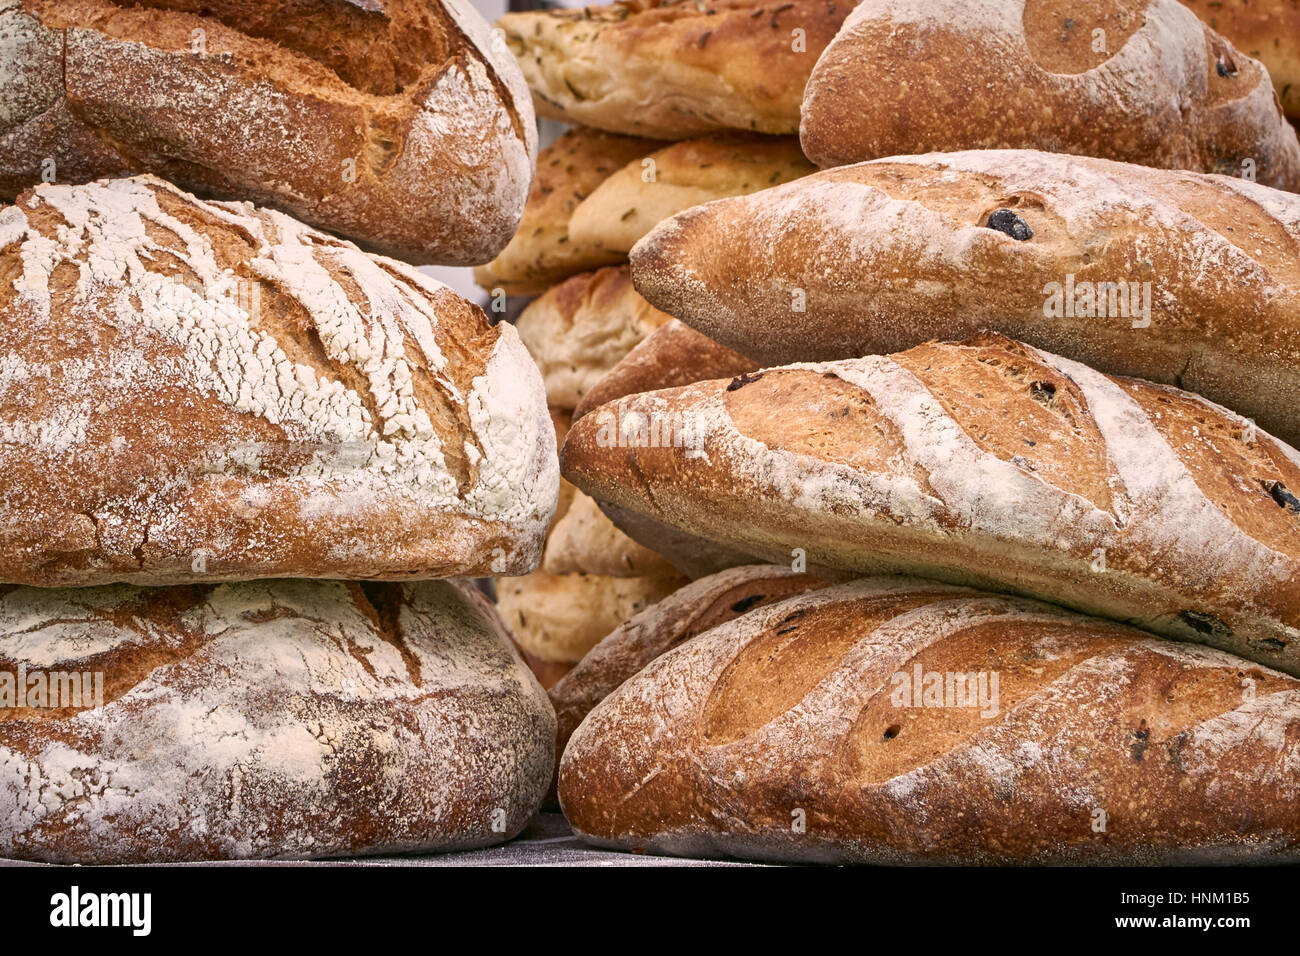 A stack of artisan bread loaves - detail Stock Photo